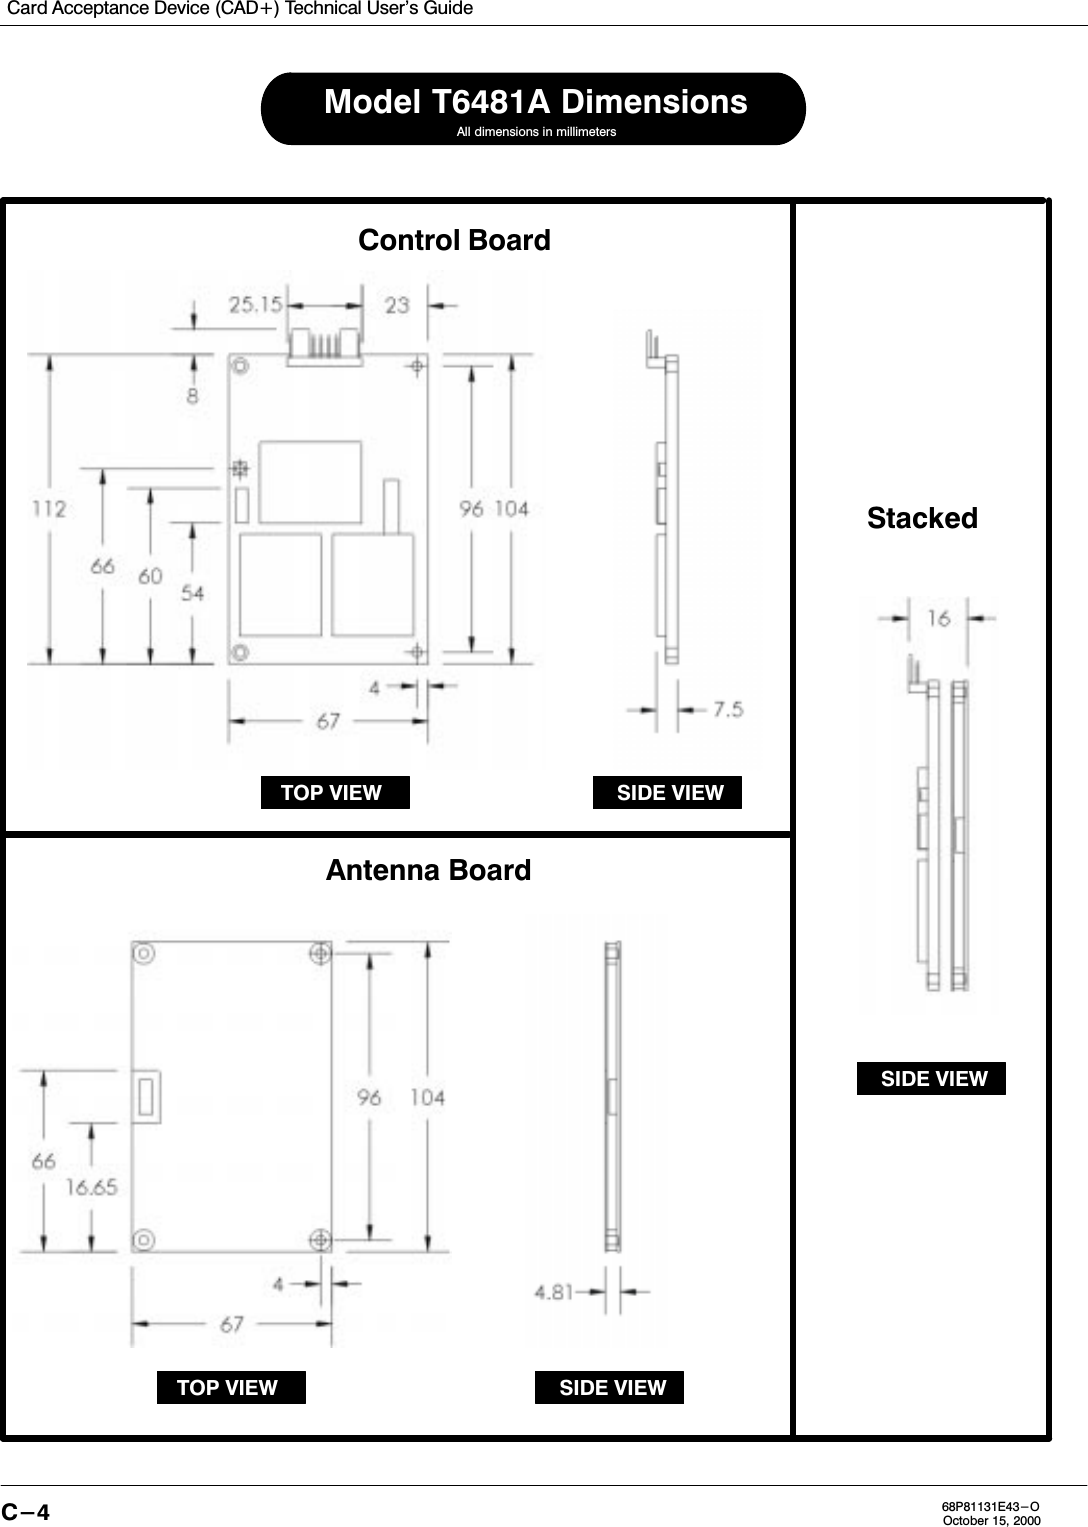 Card Acceptance Device (CAD+) Technical User&apos;s GuideC-4 68P81131E43-OOctober 15, 2000Control BoardTOP VIEW SIDE VIEWAntenna BoardAll dimensions in millimetersModel T6481A DimensionsSIDE VIEWStackedSIDE VIEWTOP VIEW